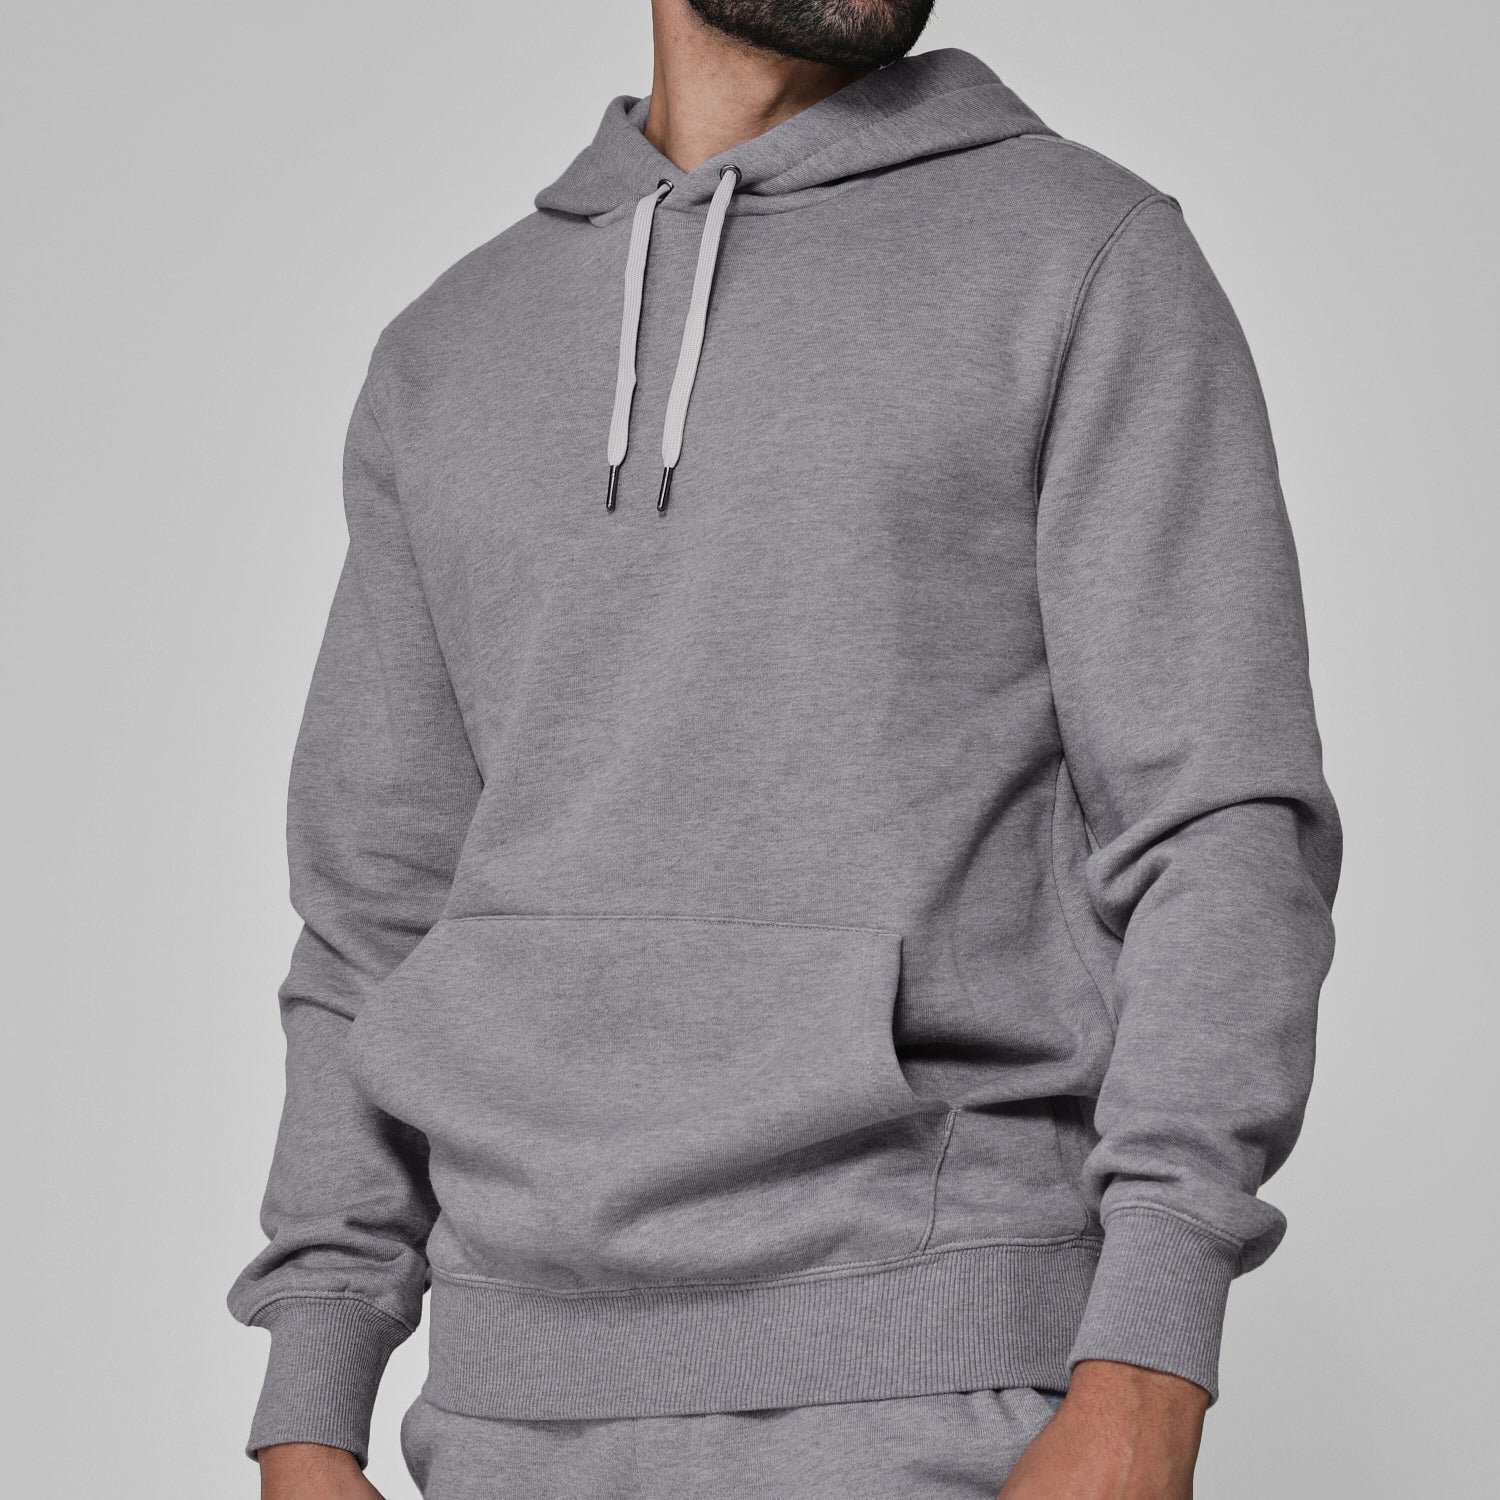 Heather Gray Pullover Hoodie and Jogger Set